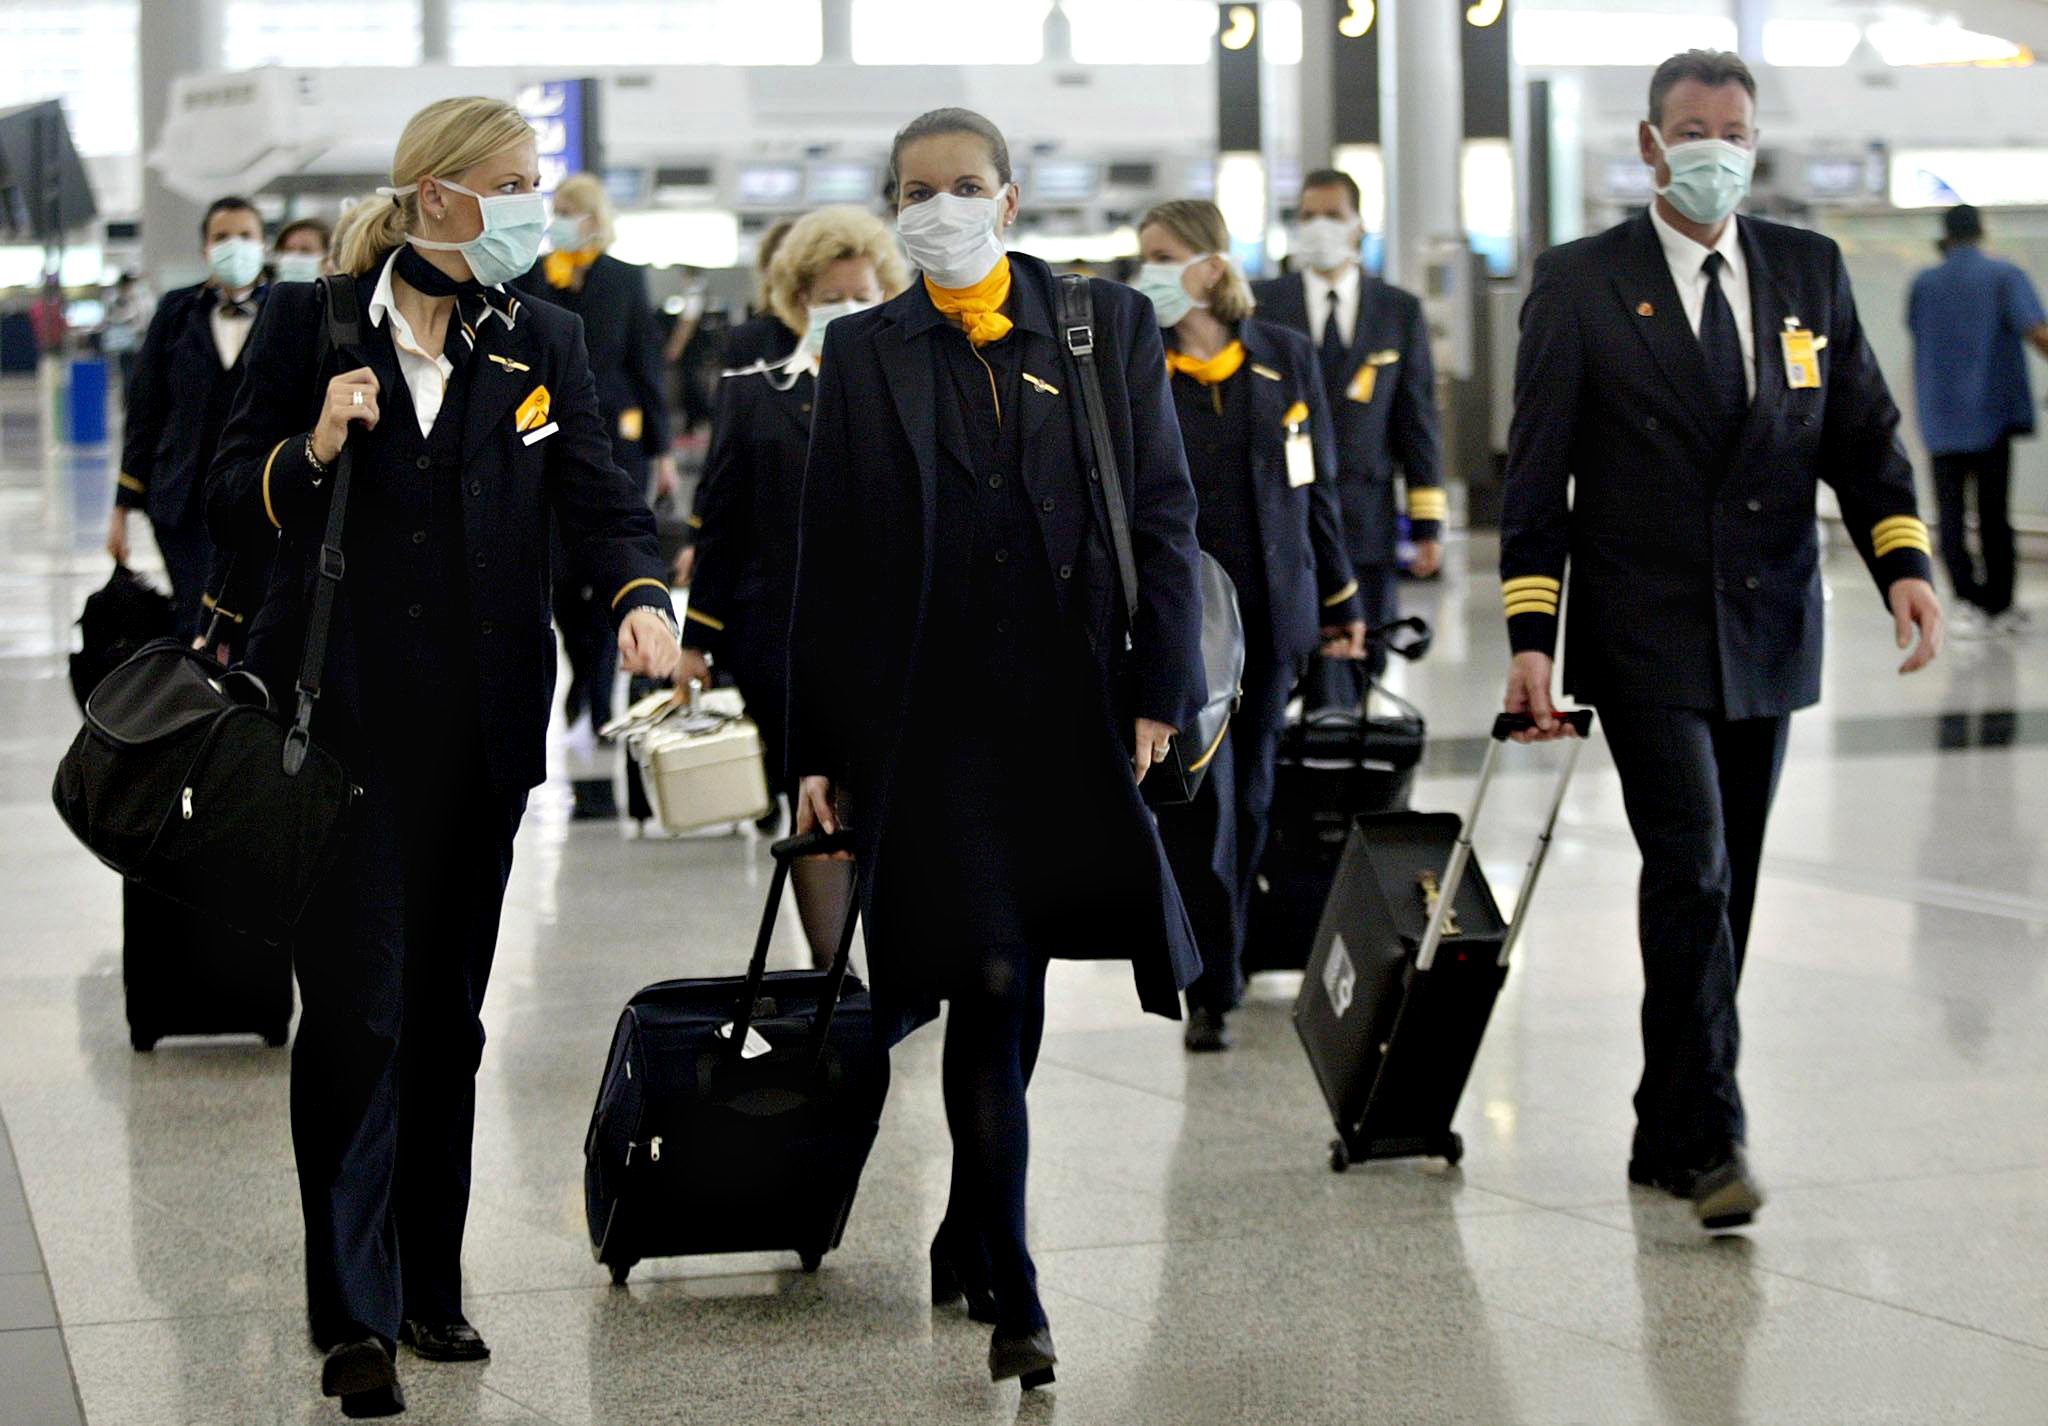 PHOTO: Aircrew for Germany's Lufthansa airline wearing masks during a pneumonia outbreak in 2003. 